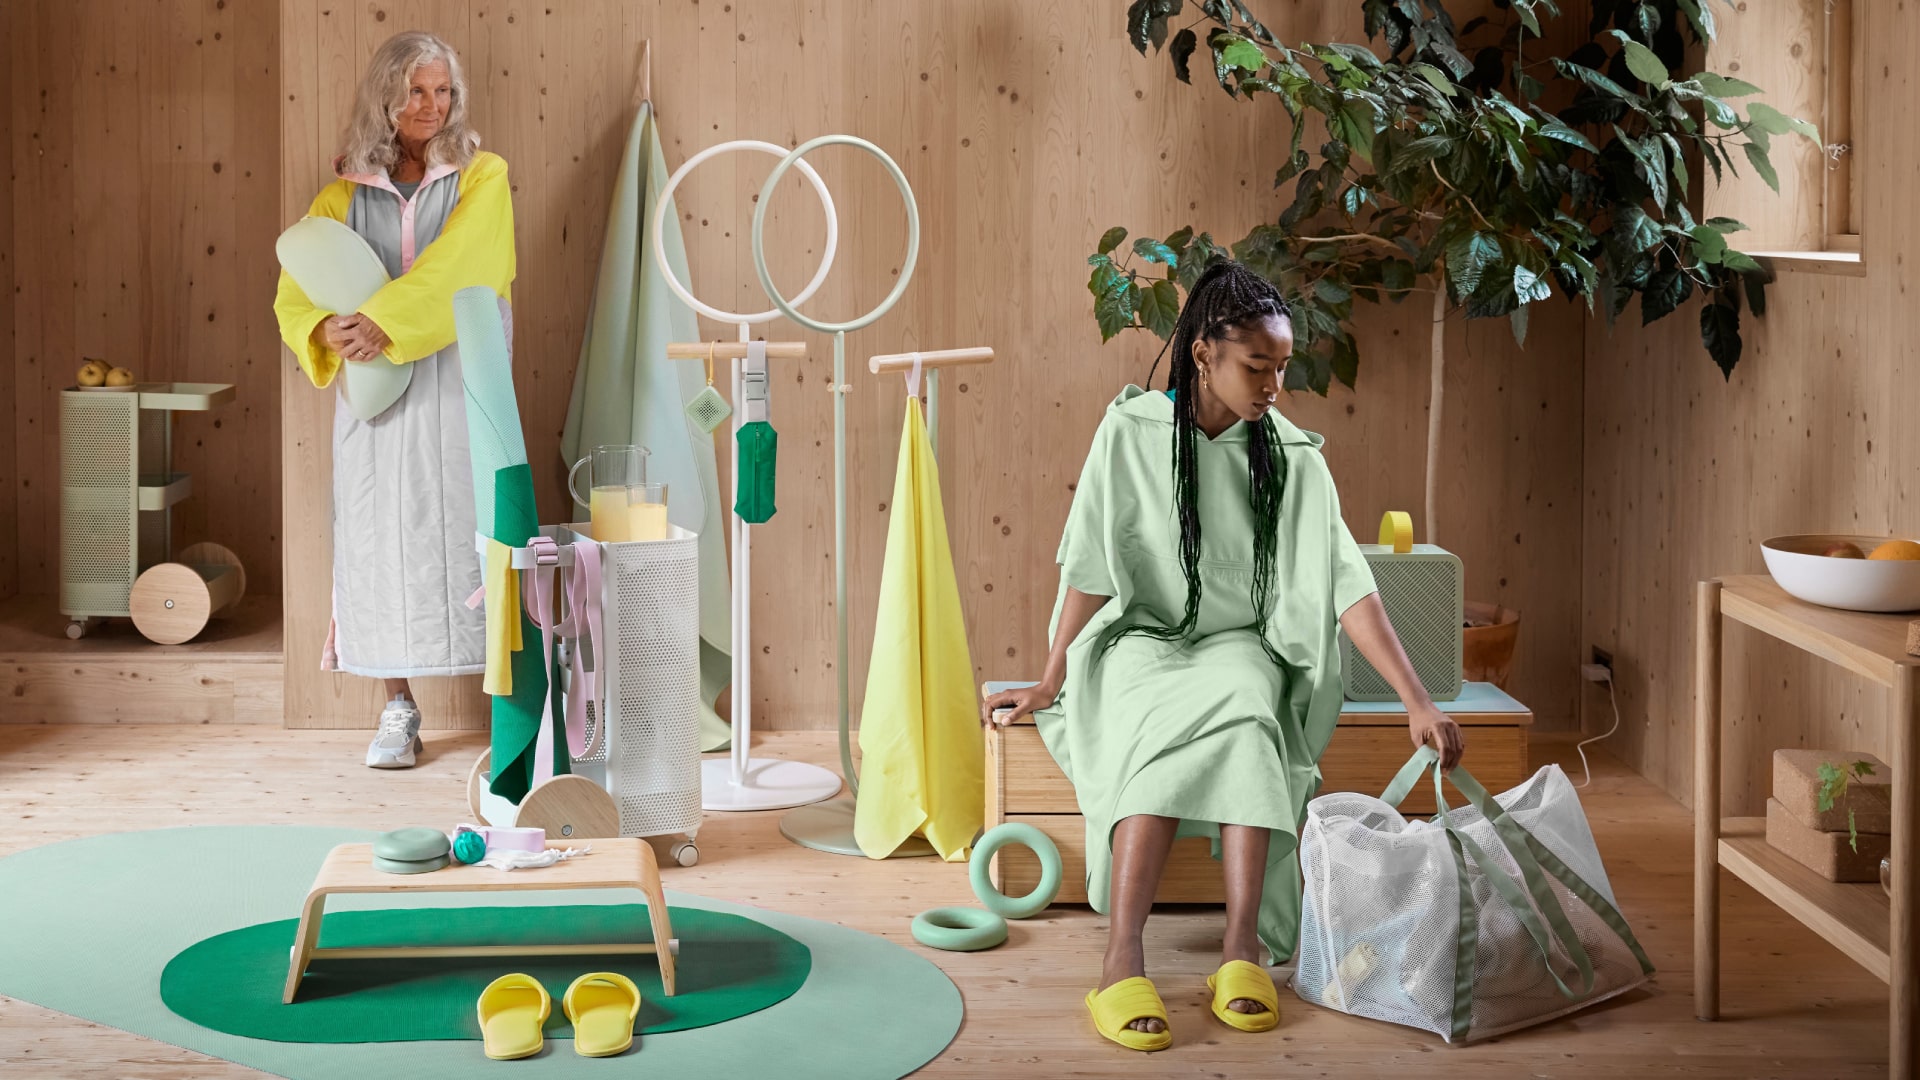 IKEA’s new fitness range lets you work out in style TechRadar